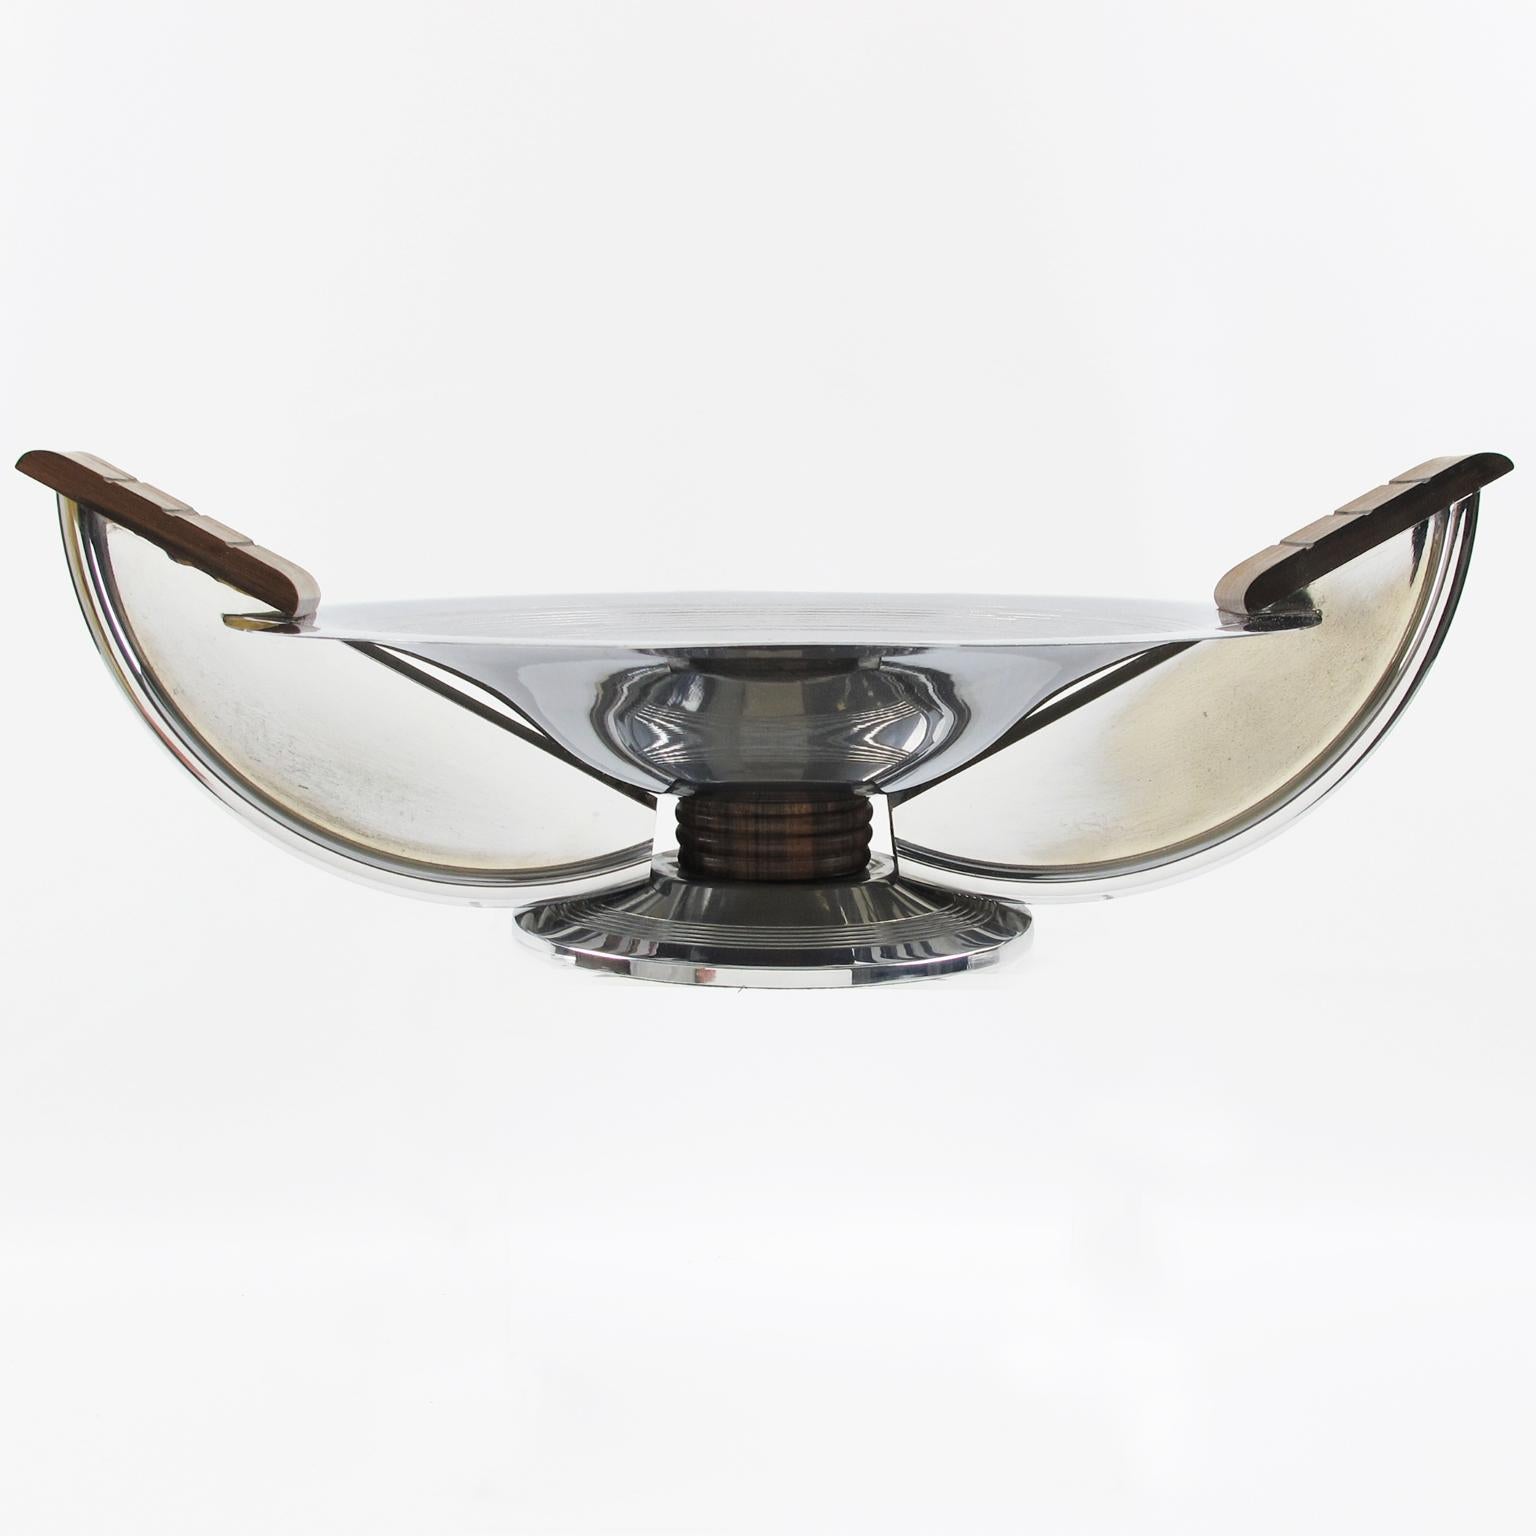 This stylish Art Deco centerpiece or decorative bowl was hand-crafted by French silversmith Massabova, Paris, in the 1930s. The round geometric shape has wing handles. The chrome-plated metal body is ornate with carved Macassar wood and complemented